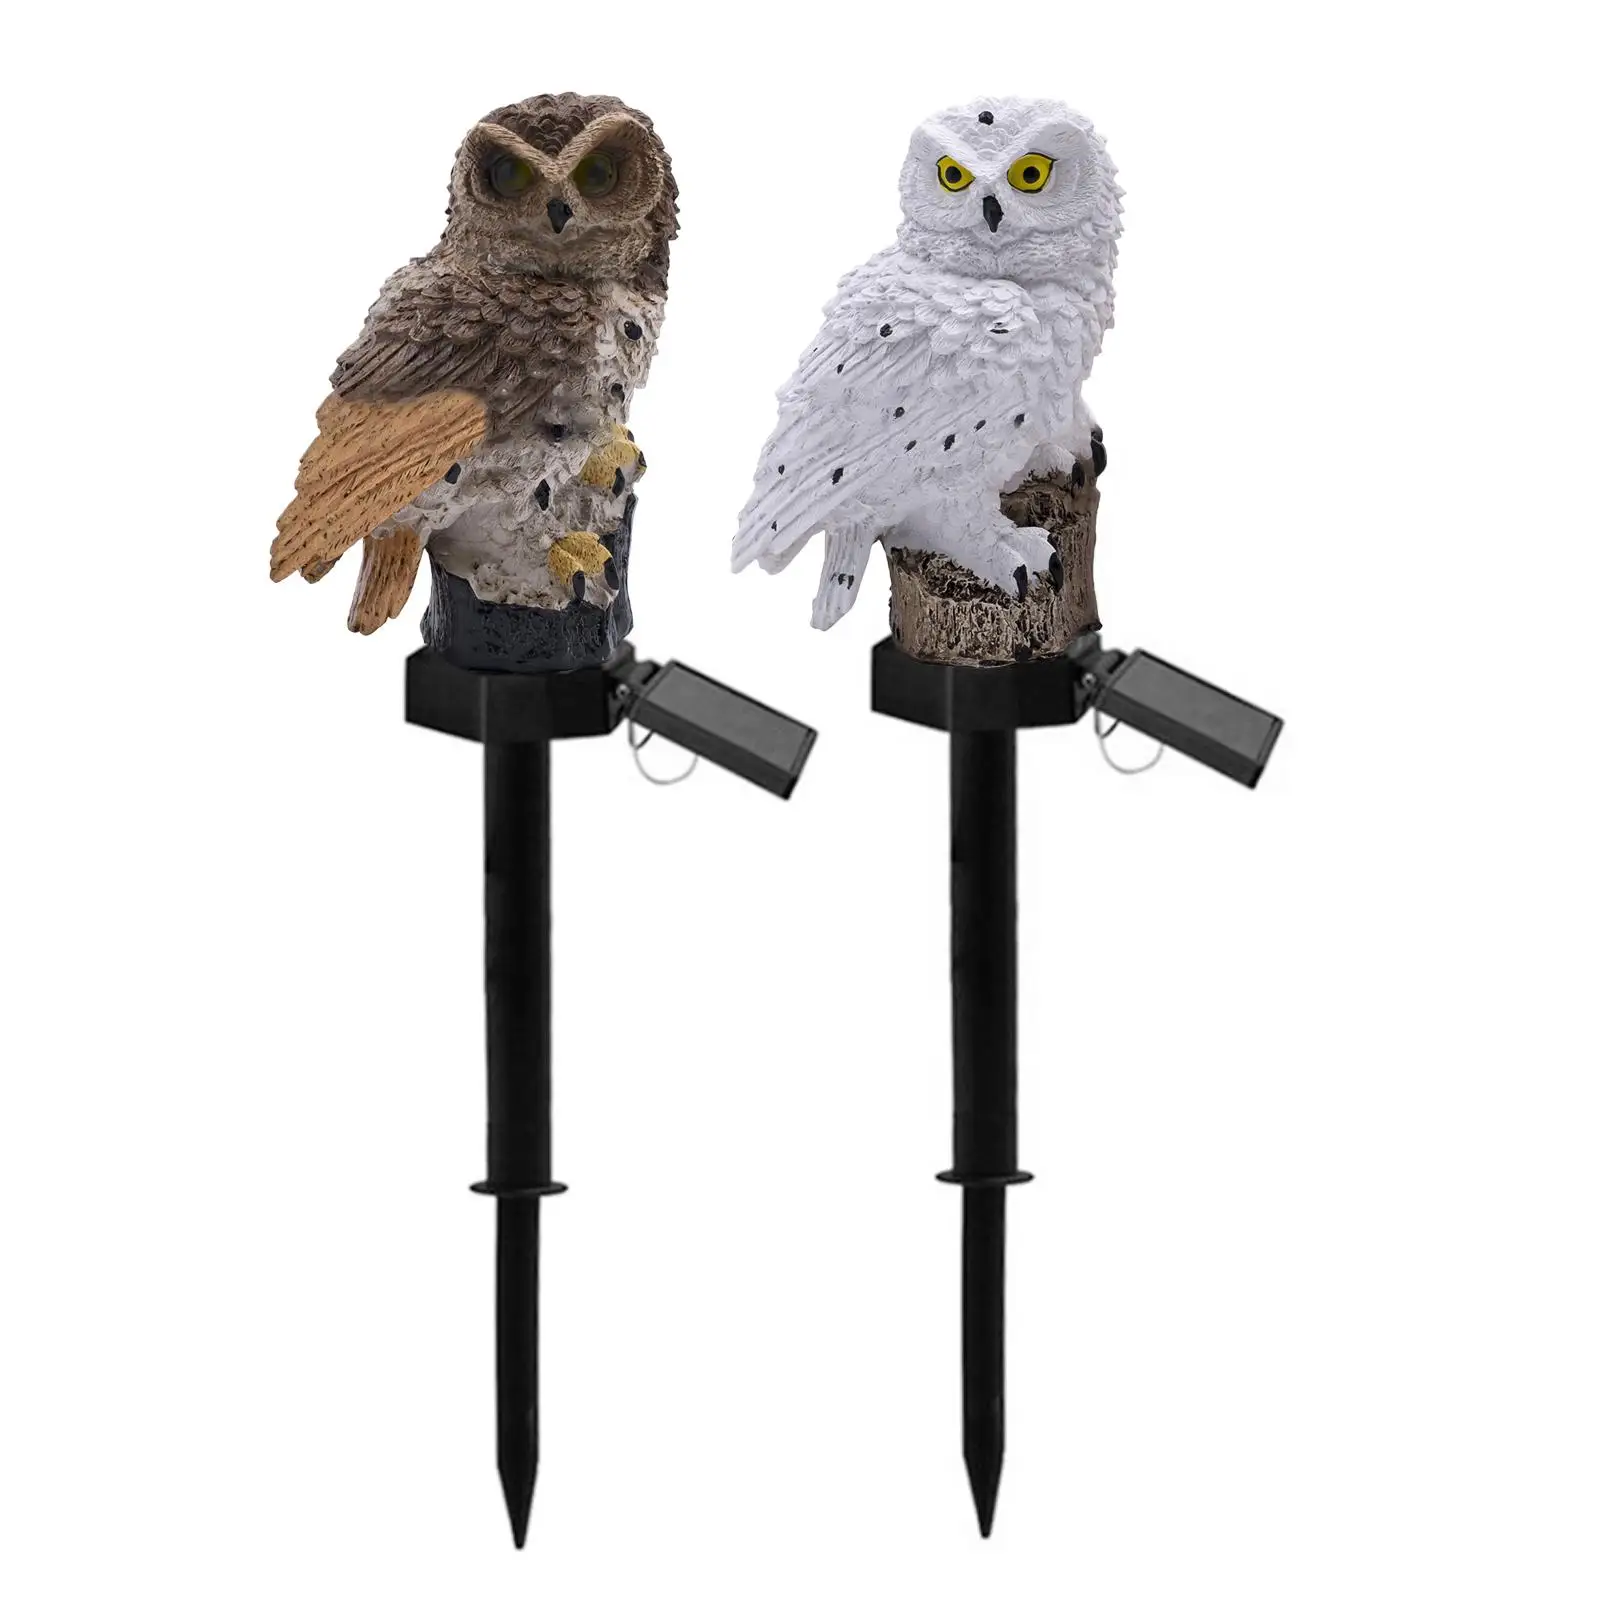 Owl Shape Lawn Light with Stake Solar Lights Resin Creative Landscape Lamp for Outdoor Lighting Ornament Christmas Garden Yard